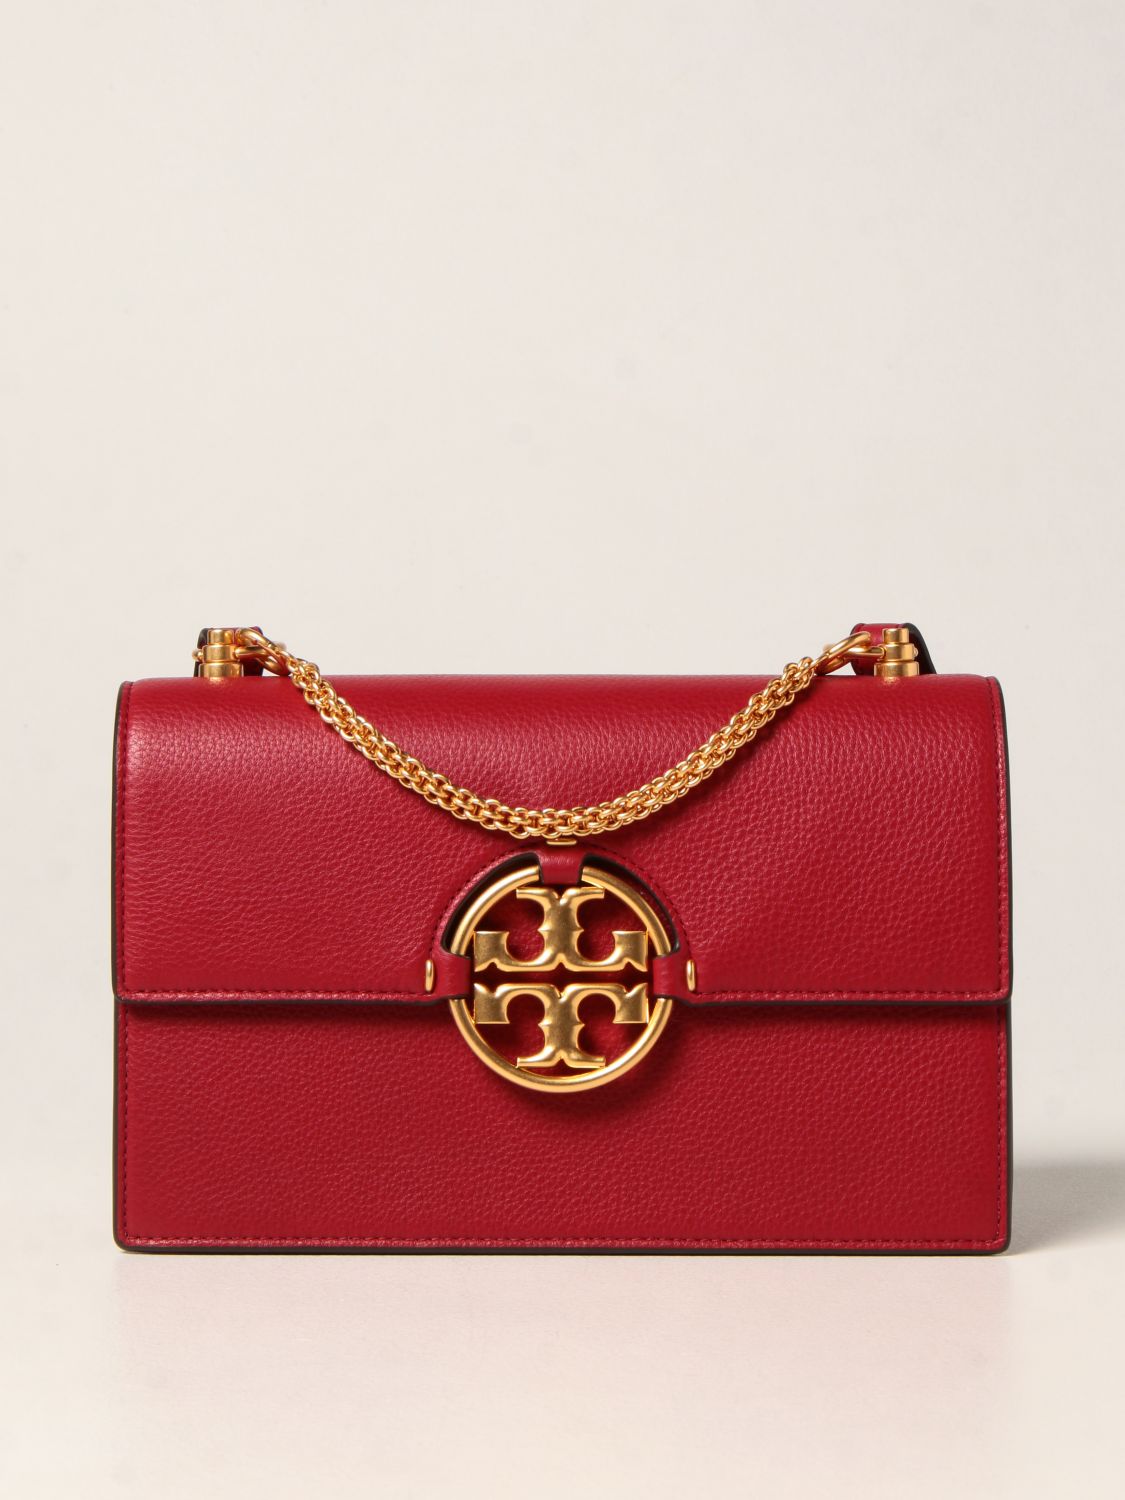 TORY BURCH: Miller bag in grained leather - Red | Tory Burch shoulder bag  81688 online on 